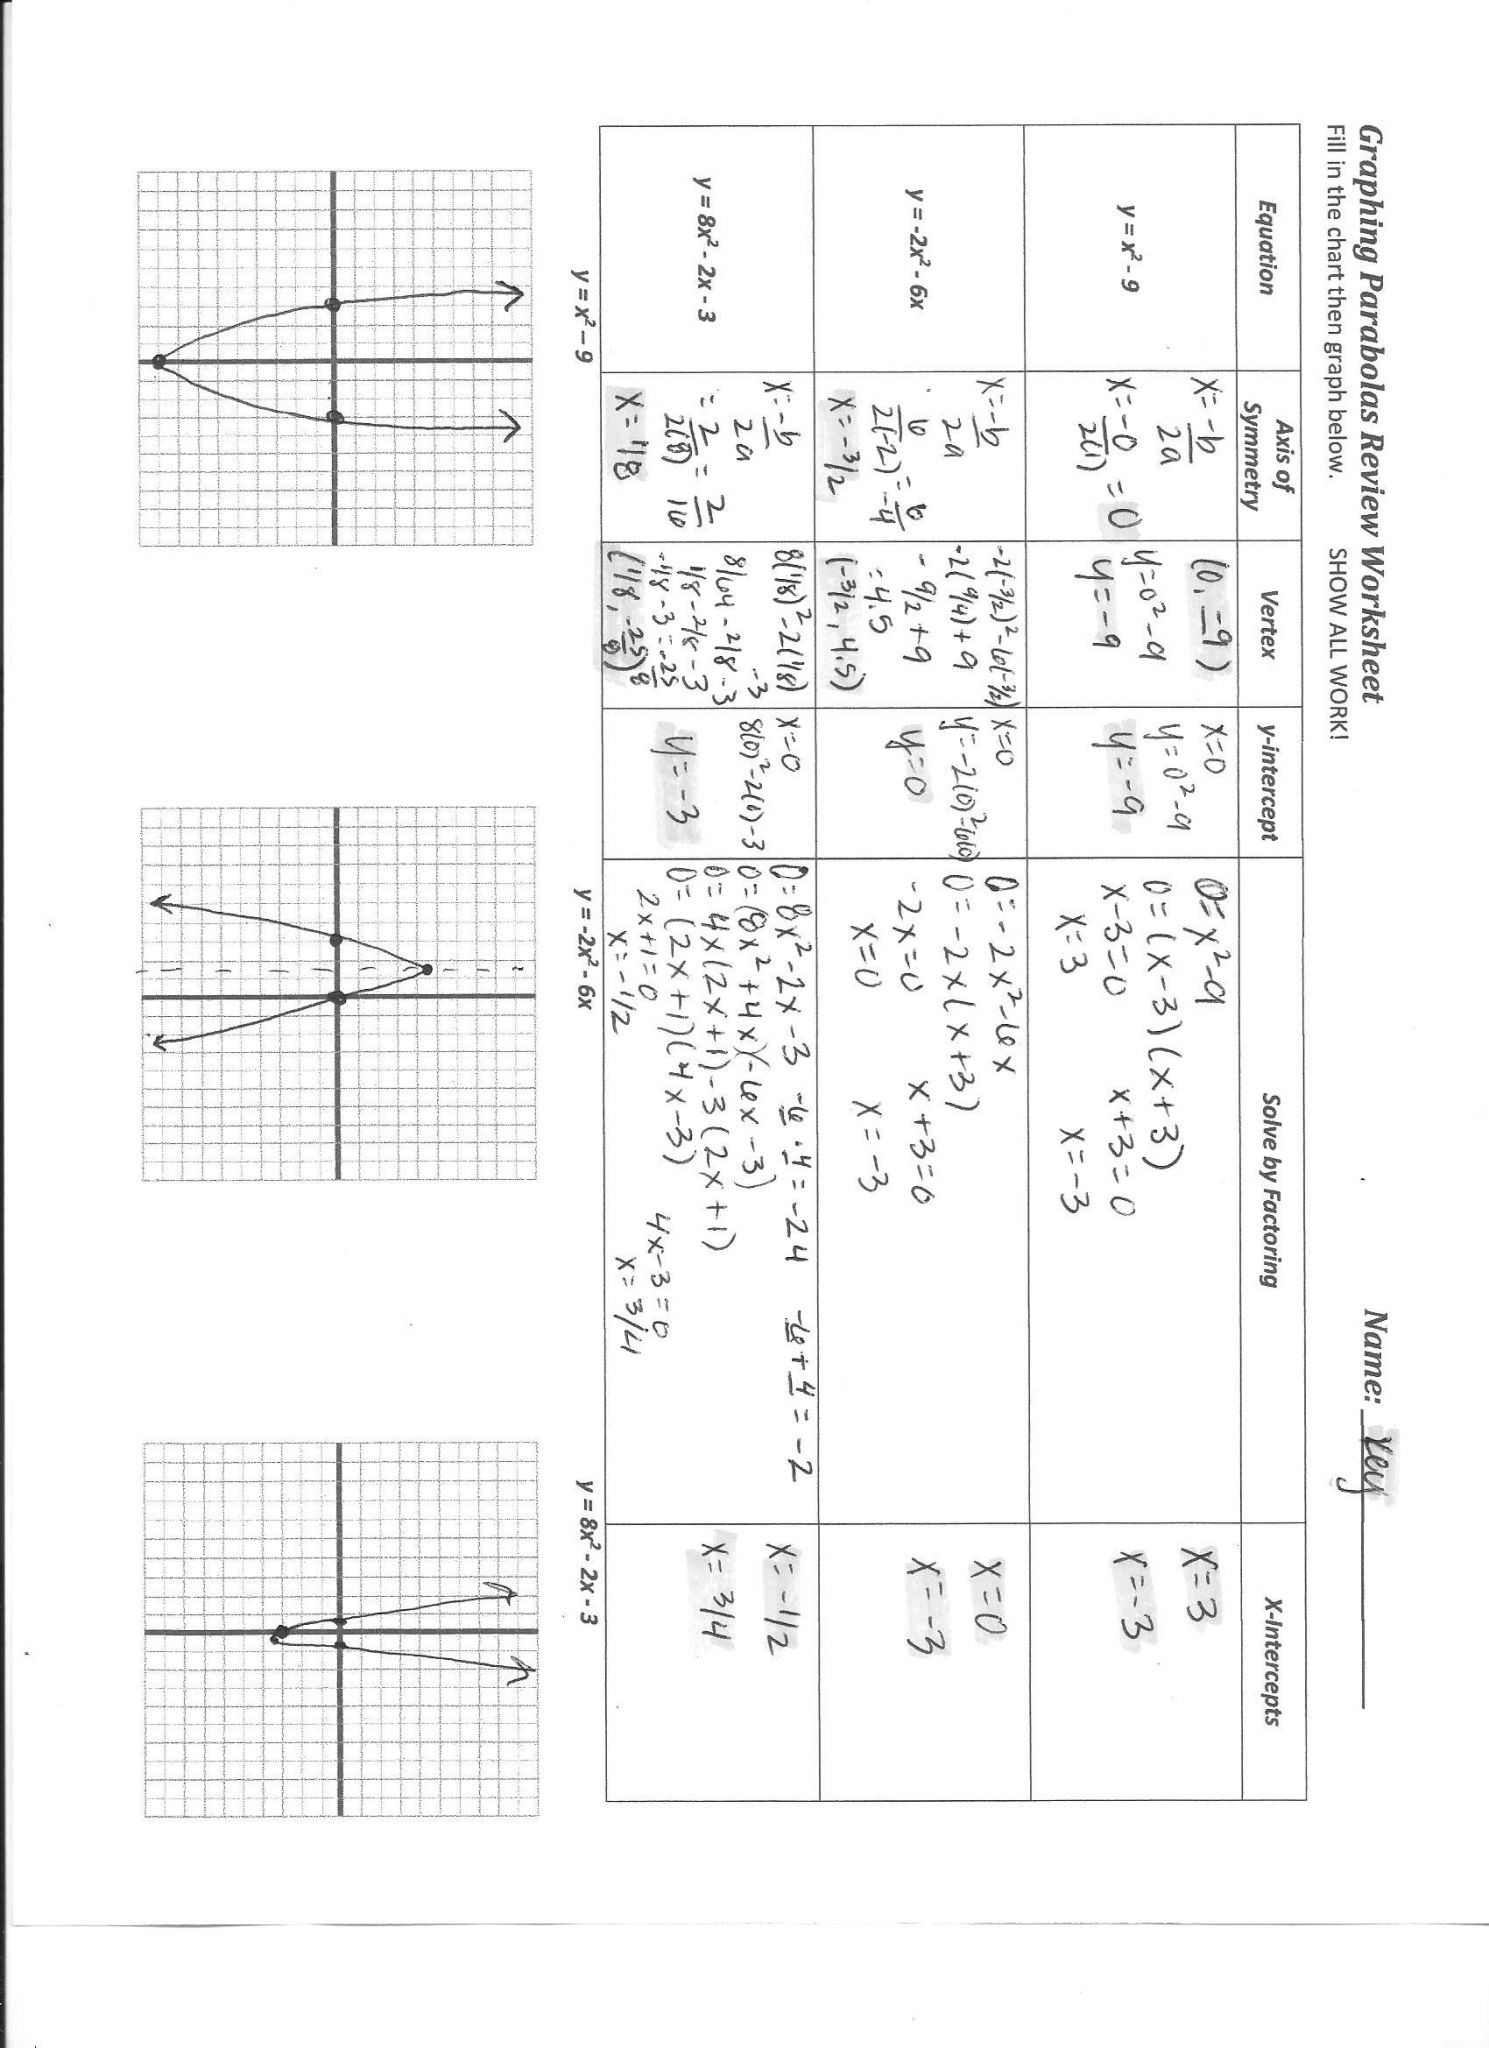 graphing-rational-functions-worksheet-answers-db-excel